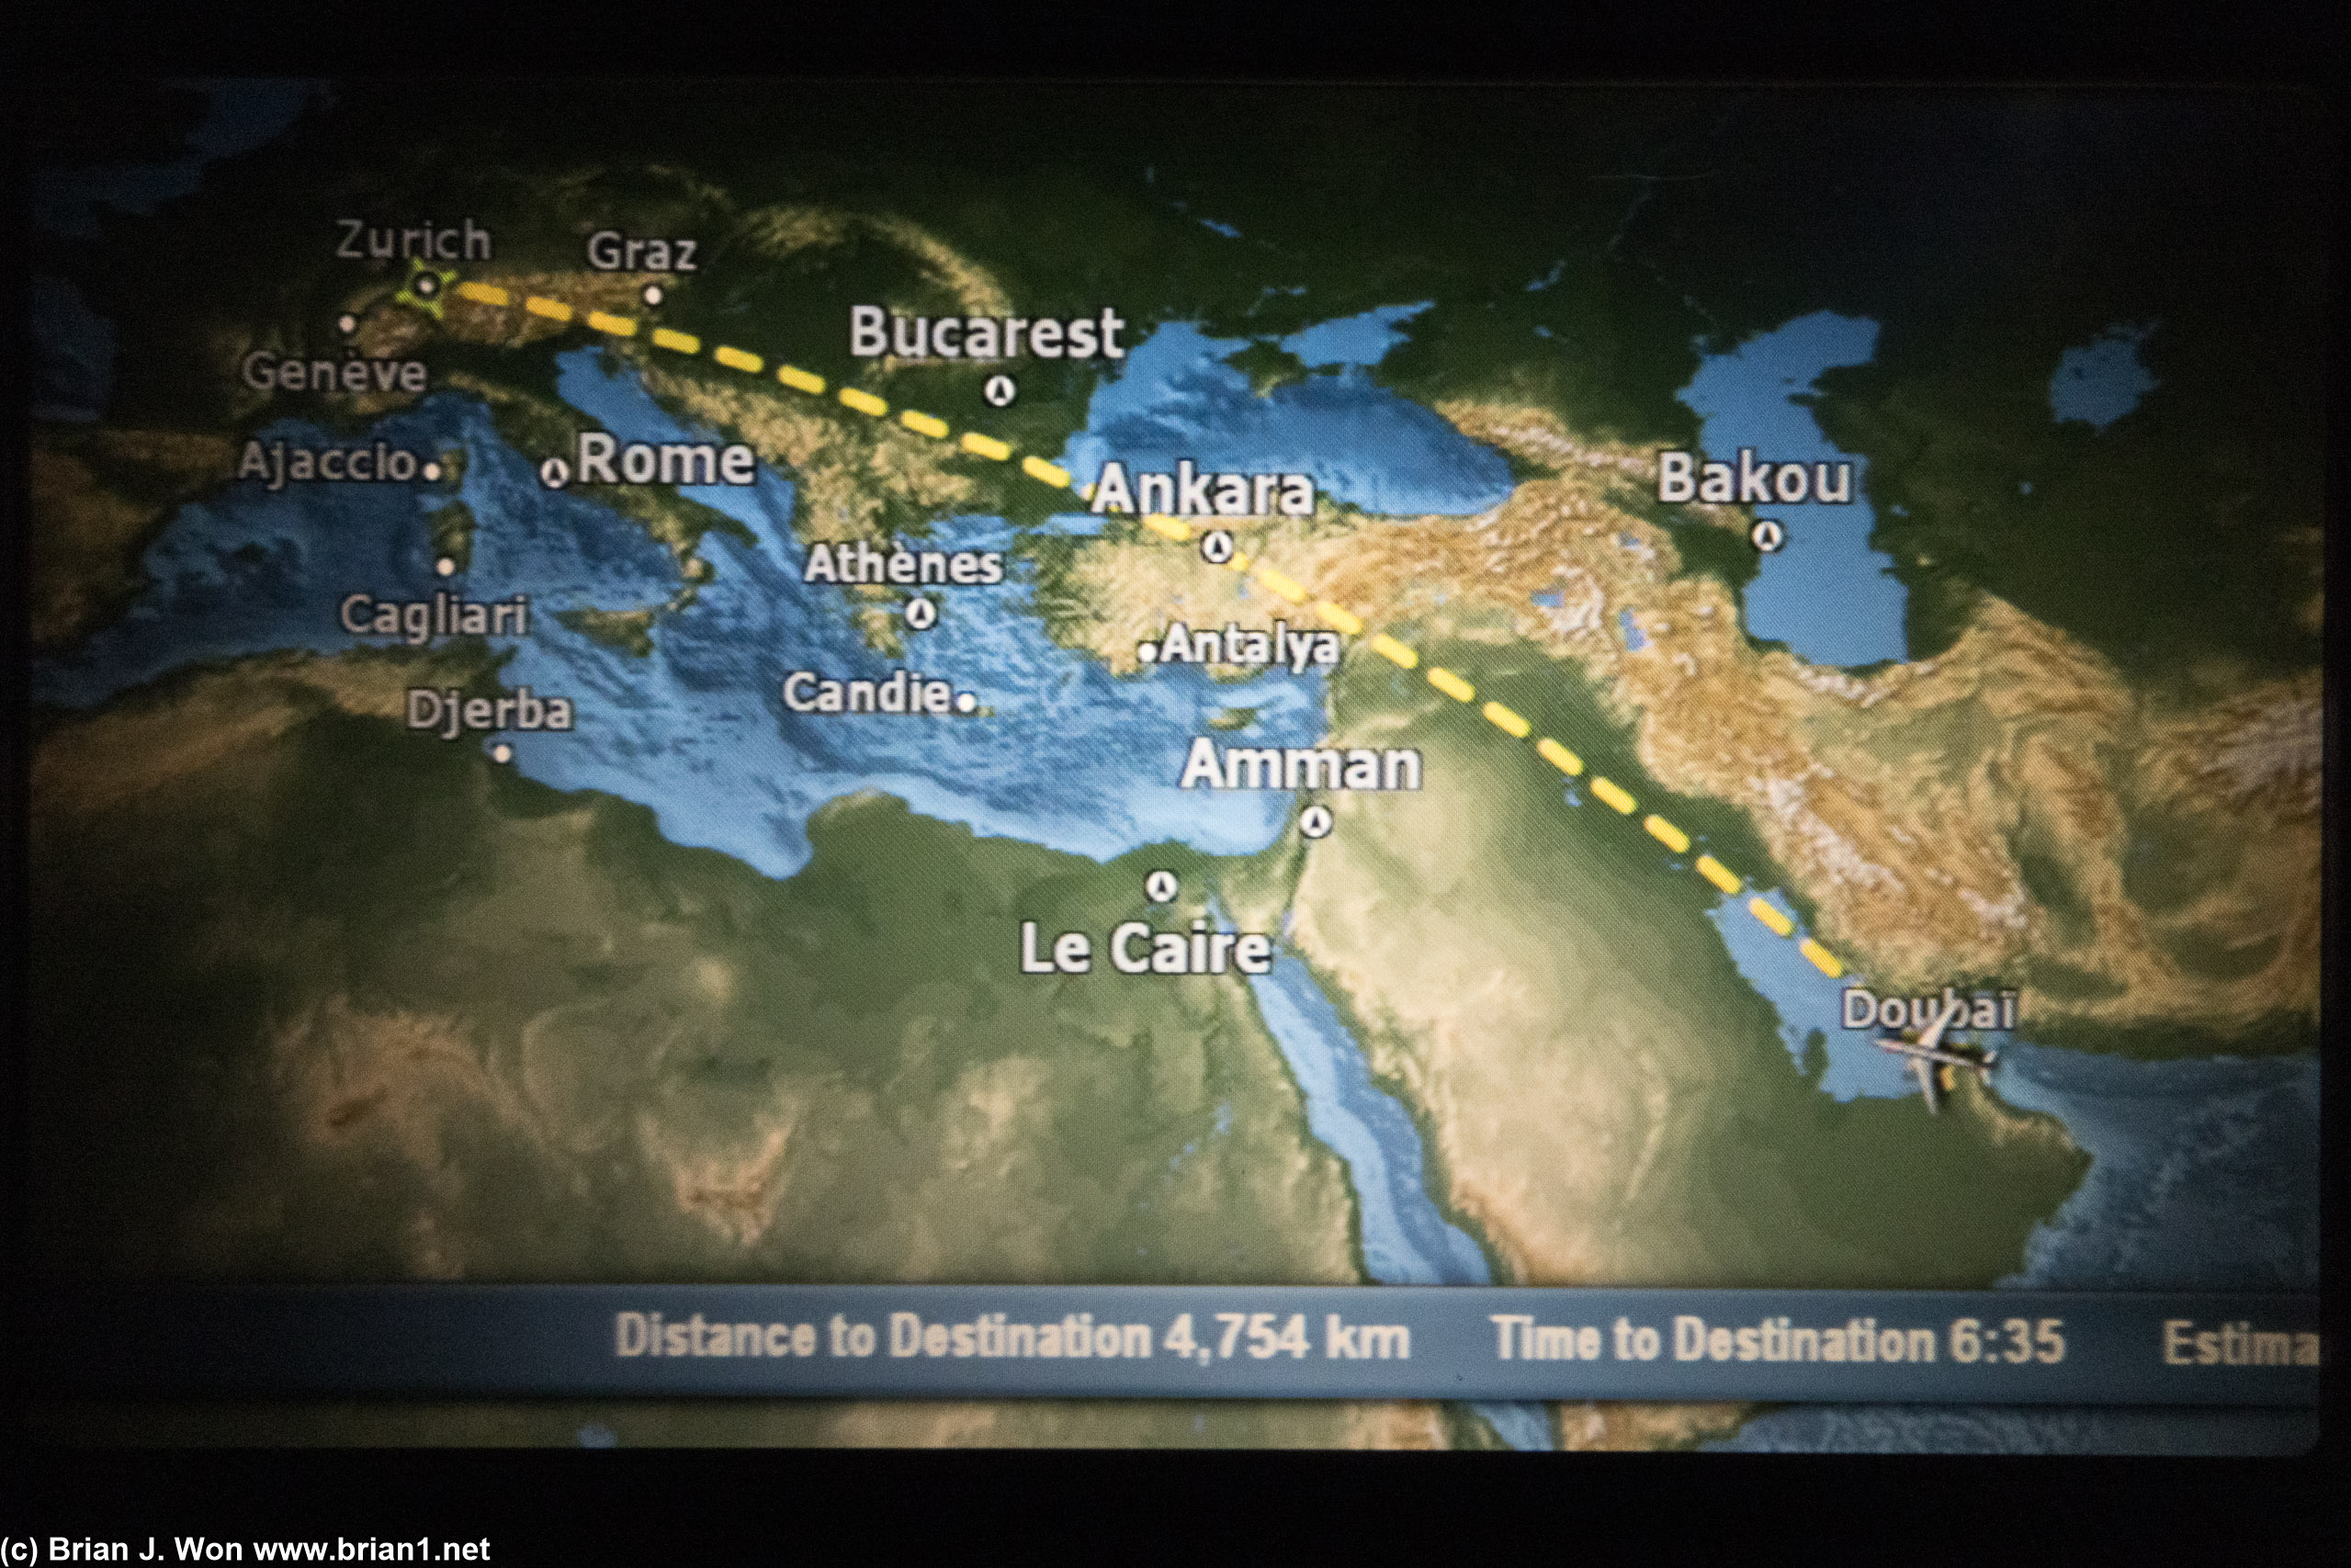 Planned routing is very normal, over Iraq and Turkey.